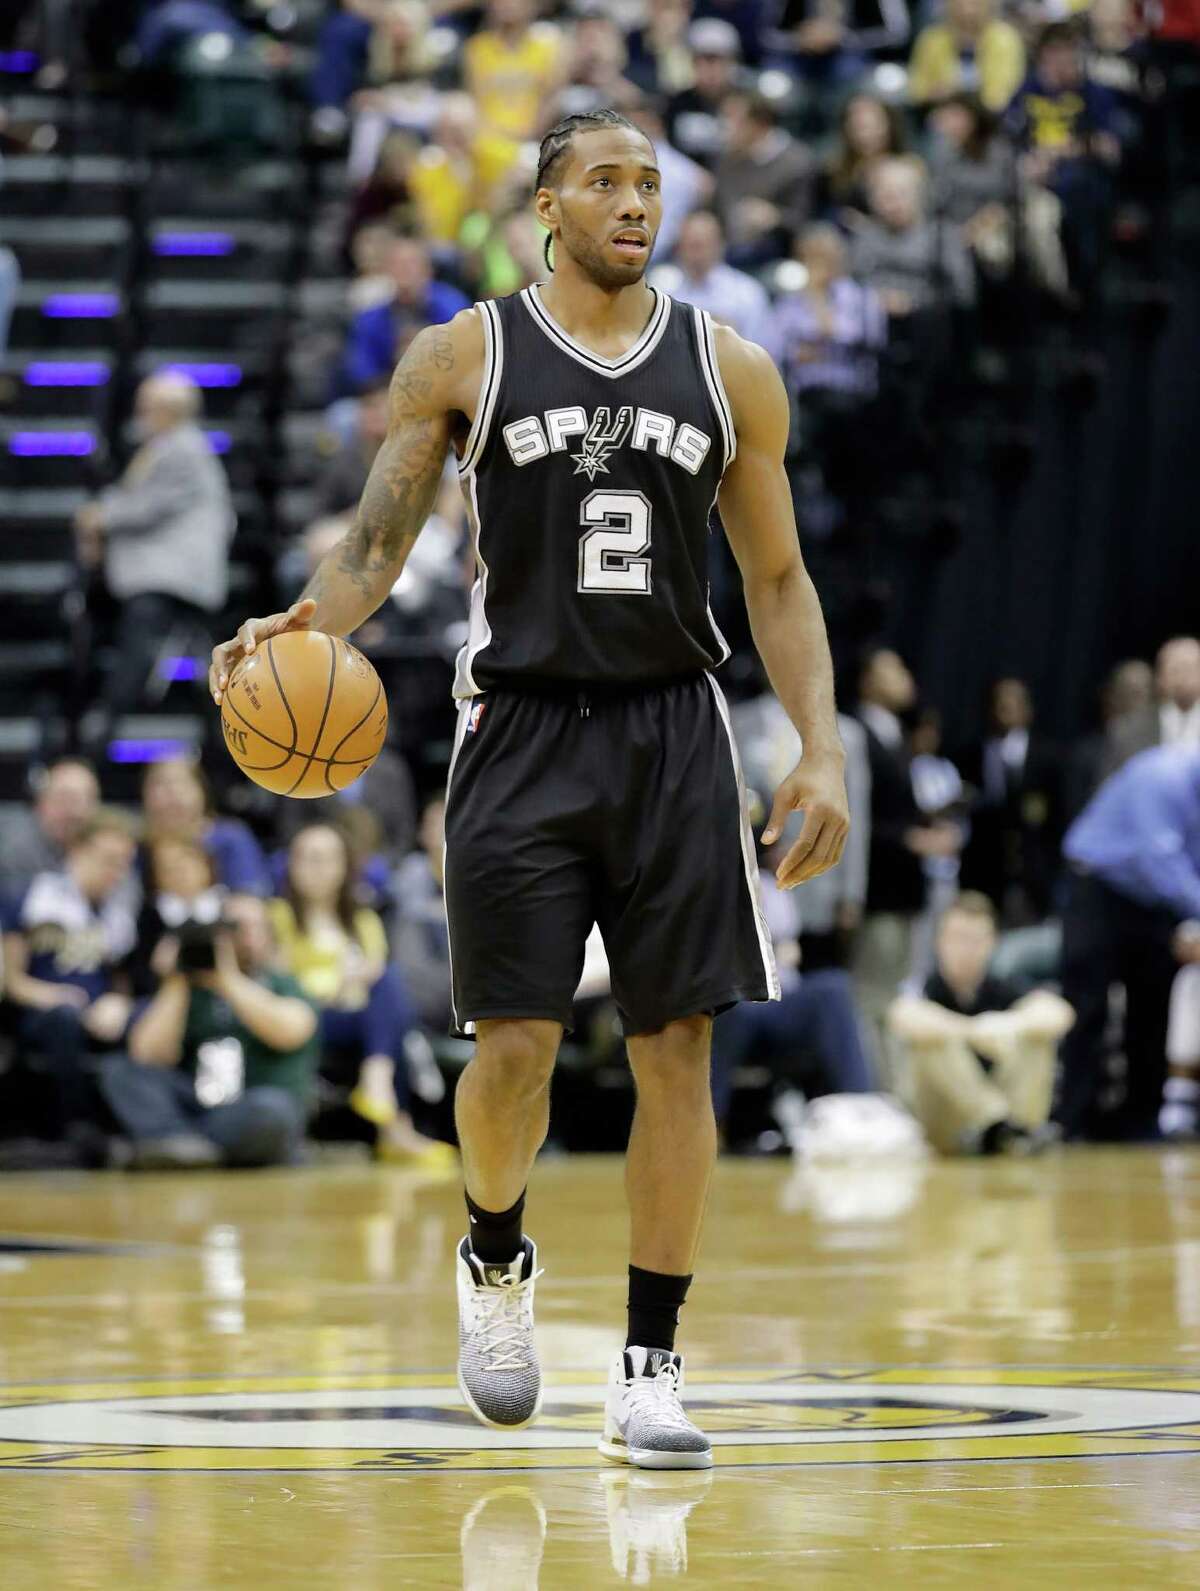 INDIANAPOLIS, IN - FEBRUARY 13: Kawhi Leonard #2 of the San Antonio Spurs dribbles the ball against the Indiana Pacers at Bankers Life Fieldhouse on February 13, 2017 in Indianapolis, Indiana. NOTE TO USER: User expressly acknowledges and agrees that, by downloading and or using this photograph, User is consenting to the terms and conditions of the Getty Images License Agreement